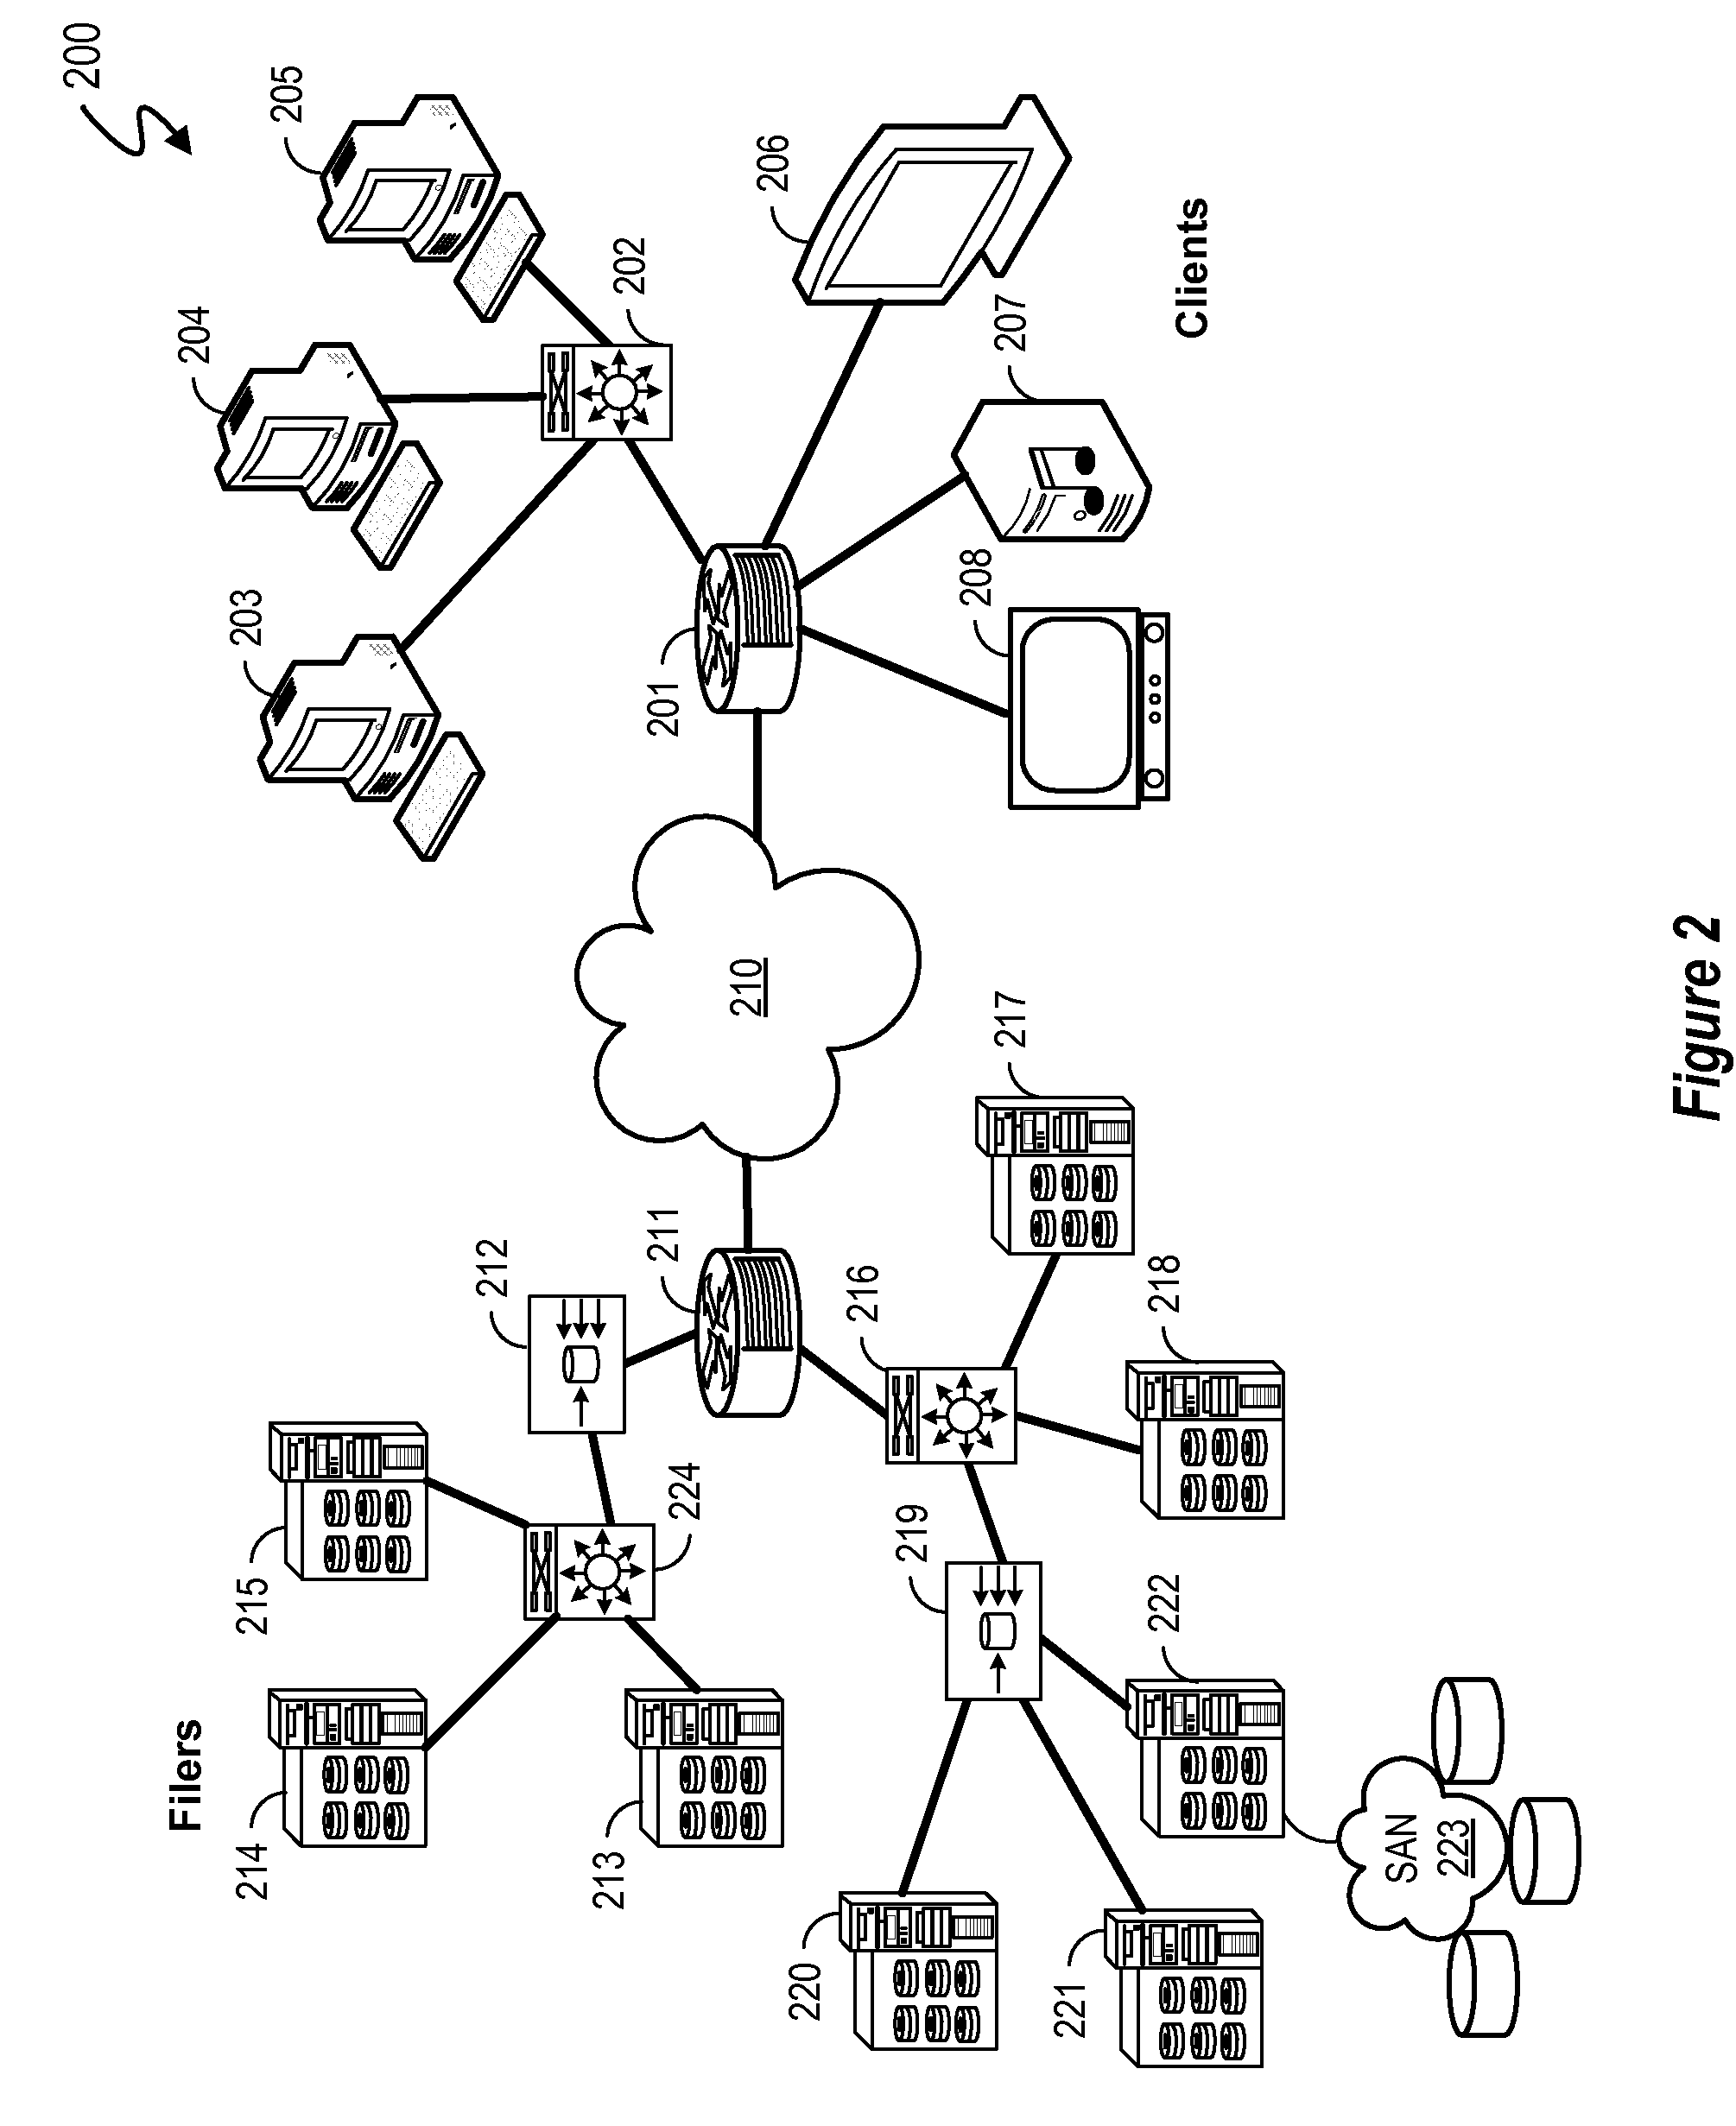 Flash DIMM in a standalone cache appliance system and methodology